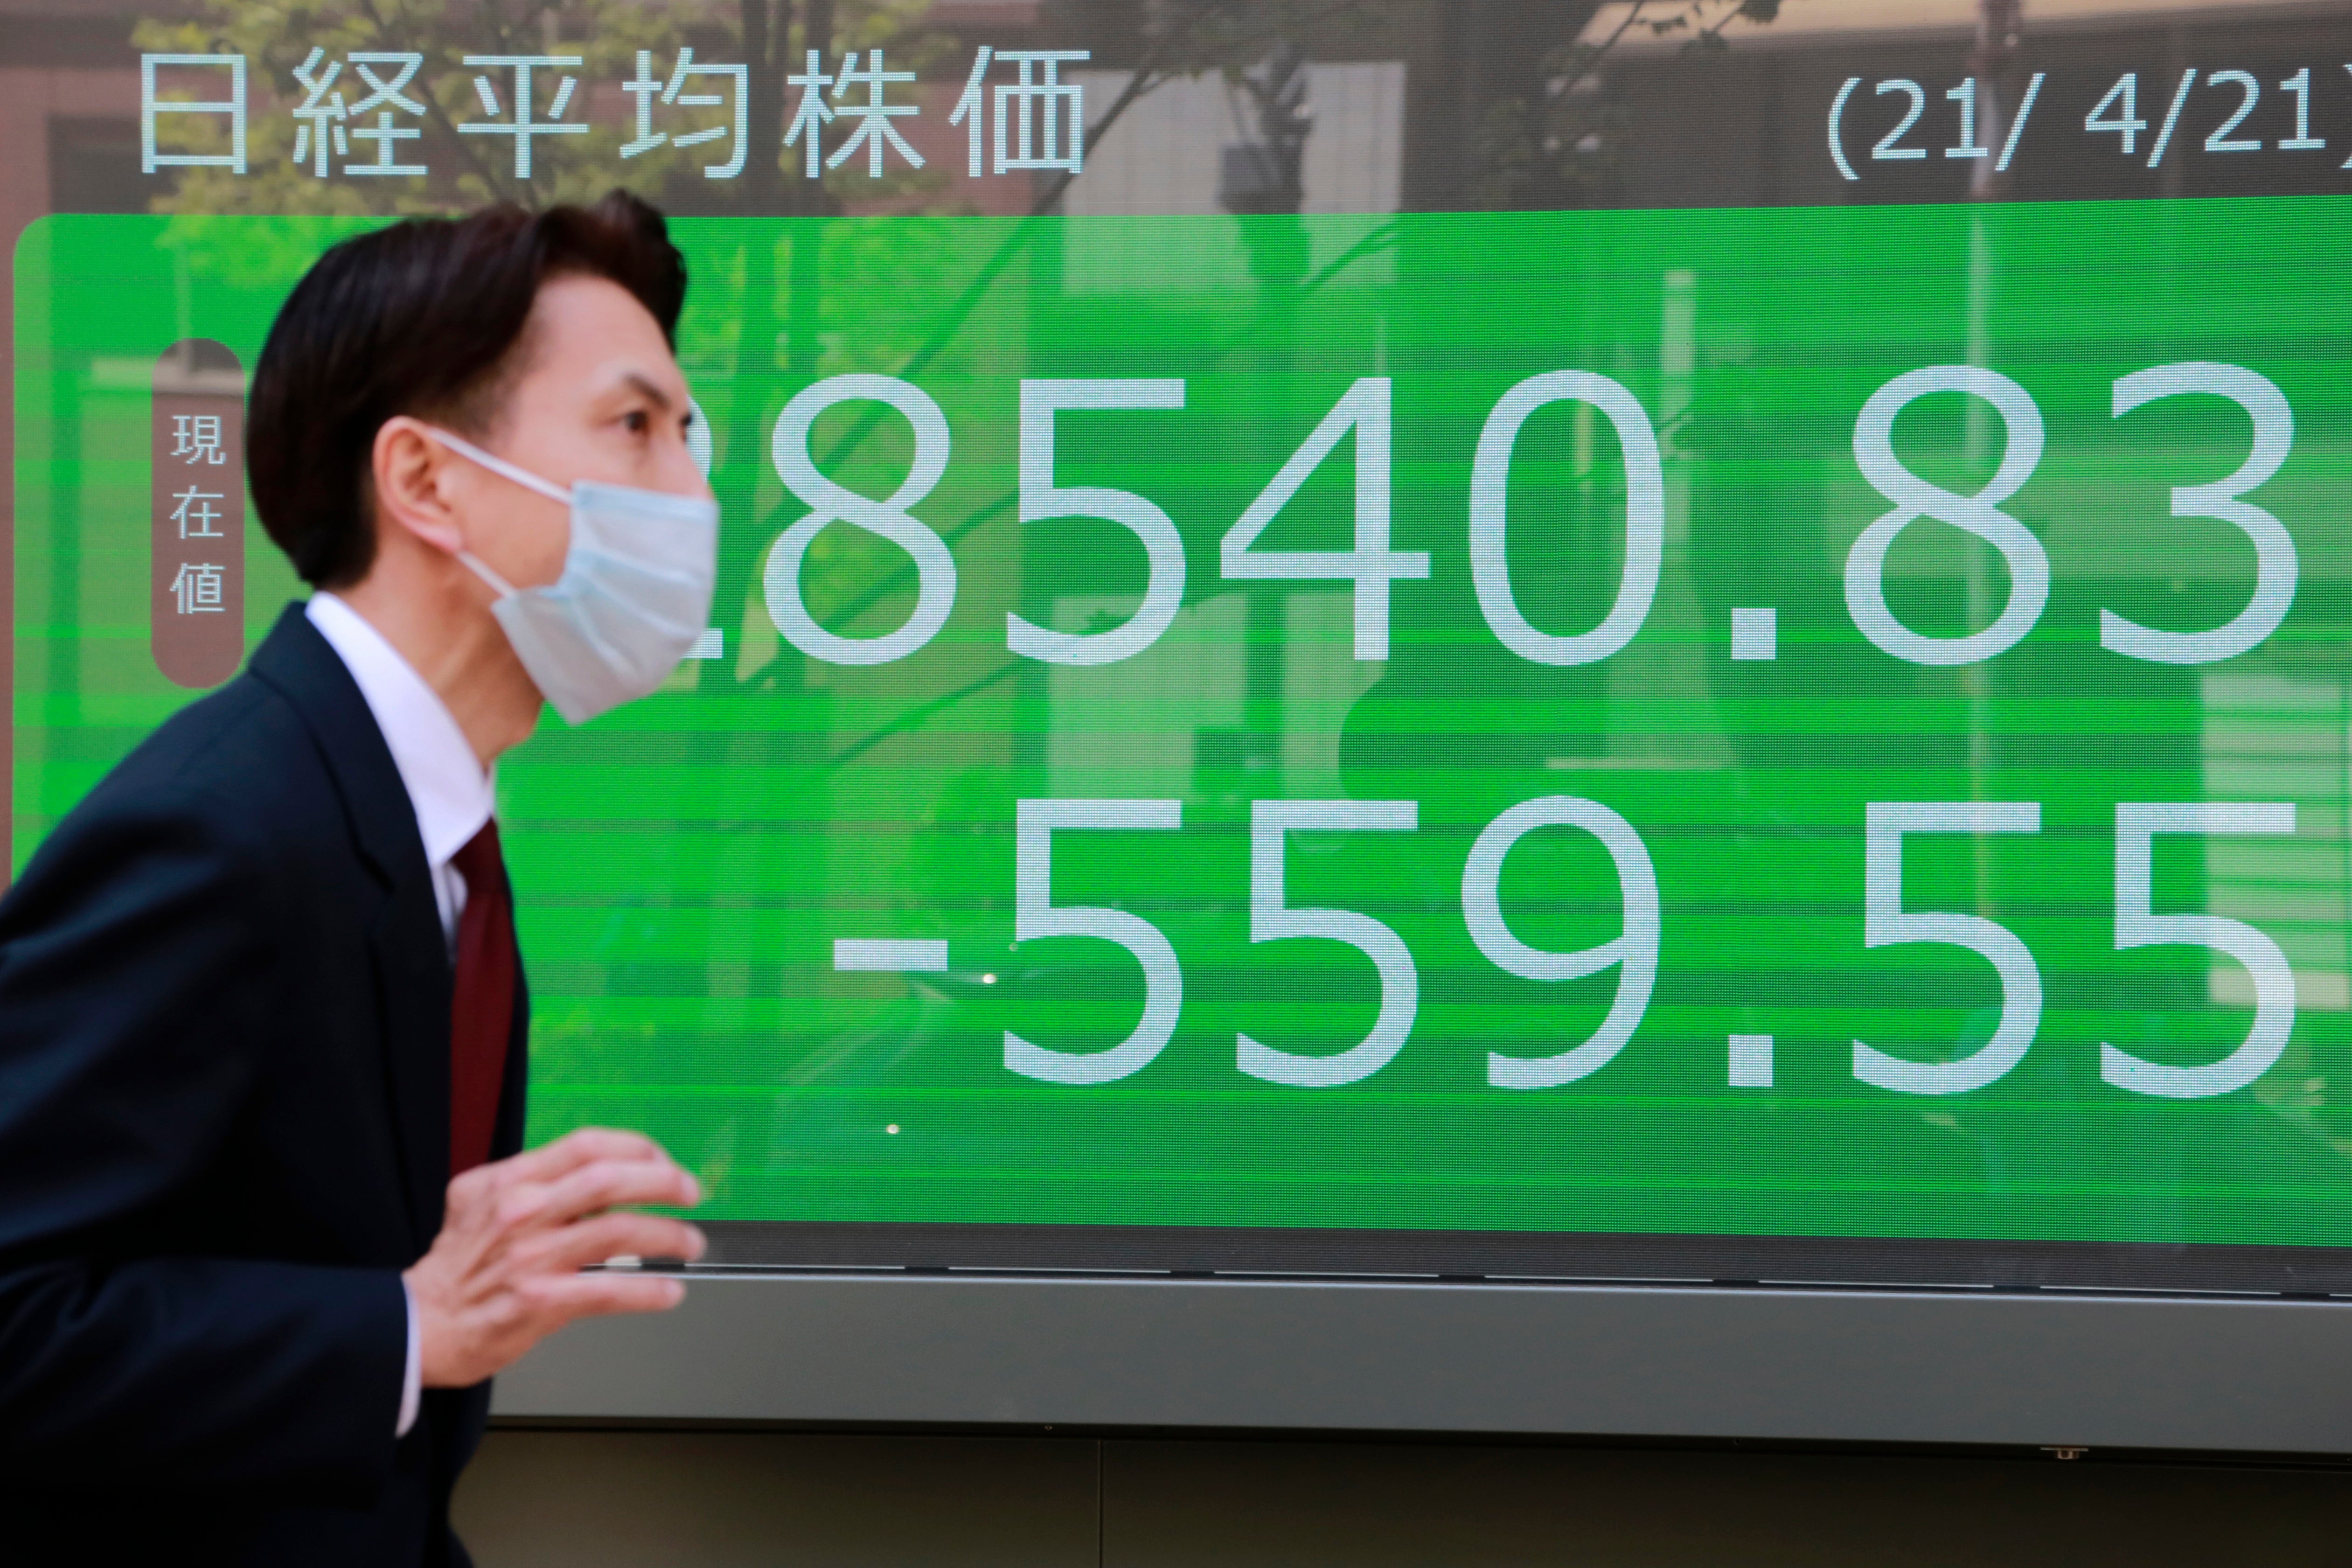 A man reads Asia-Pacific shares in a mixed trading day after US stocks tumble (file image)